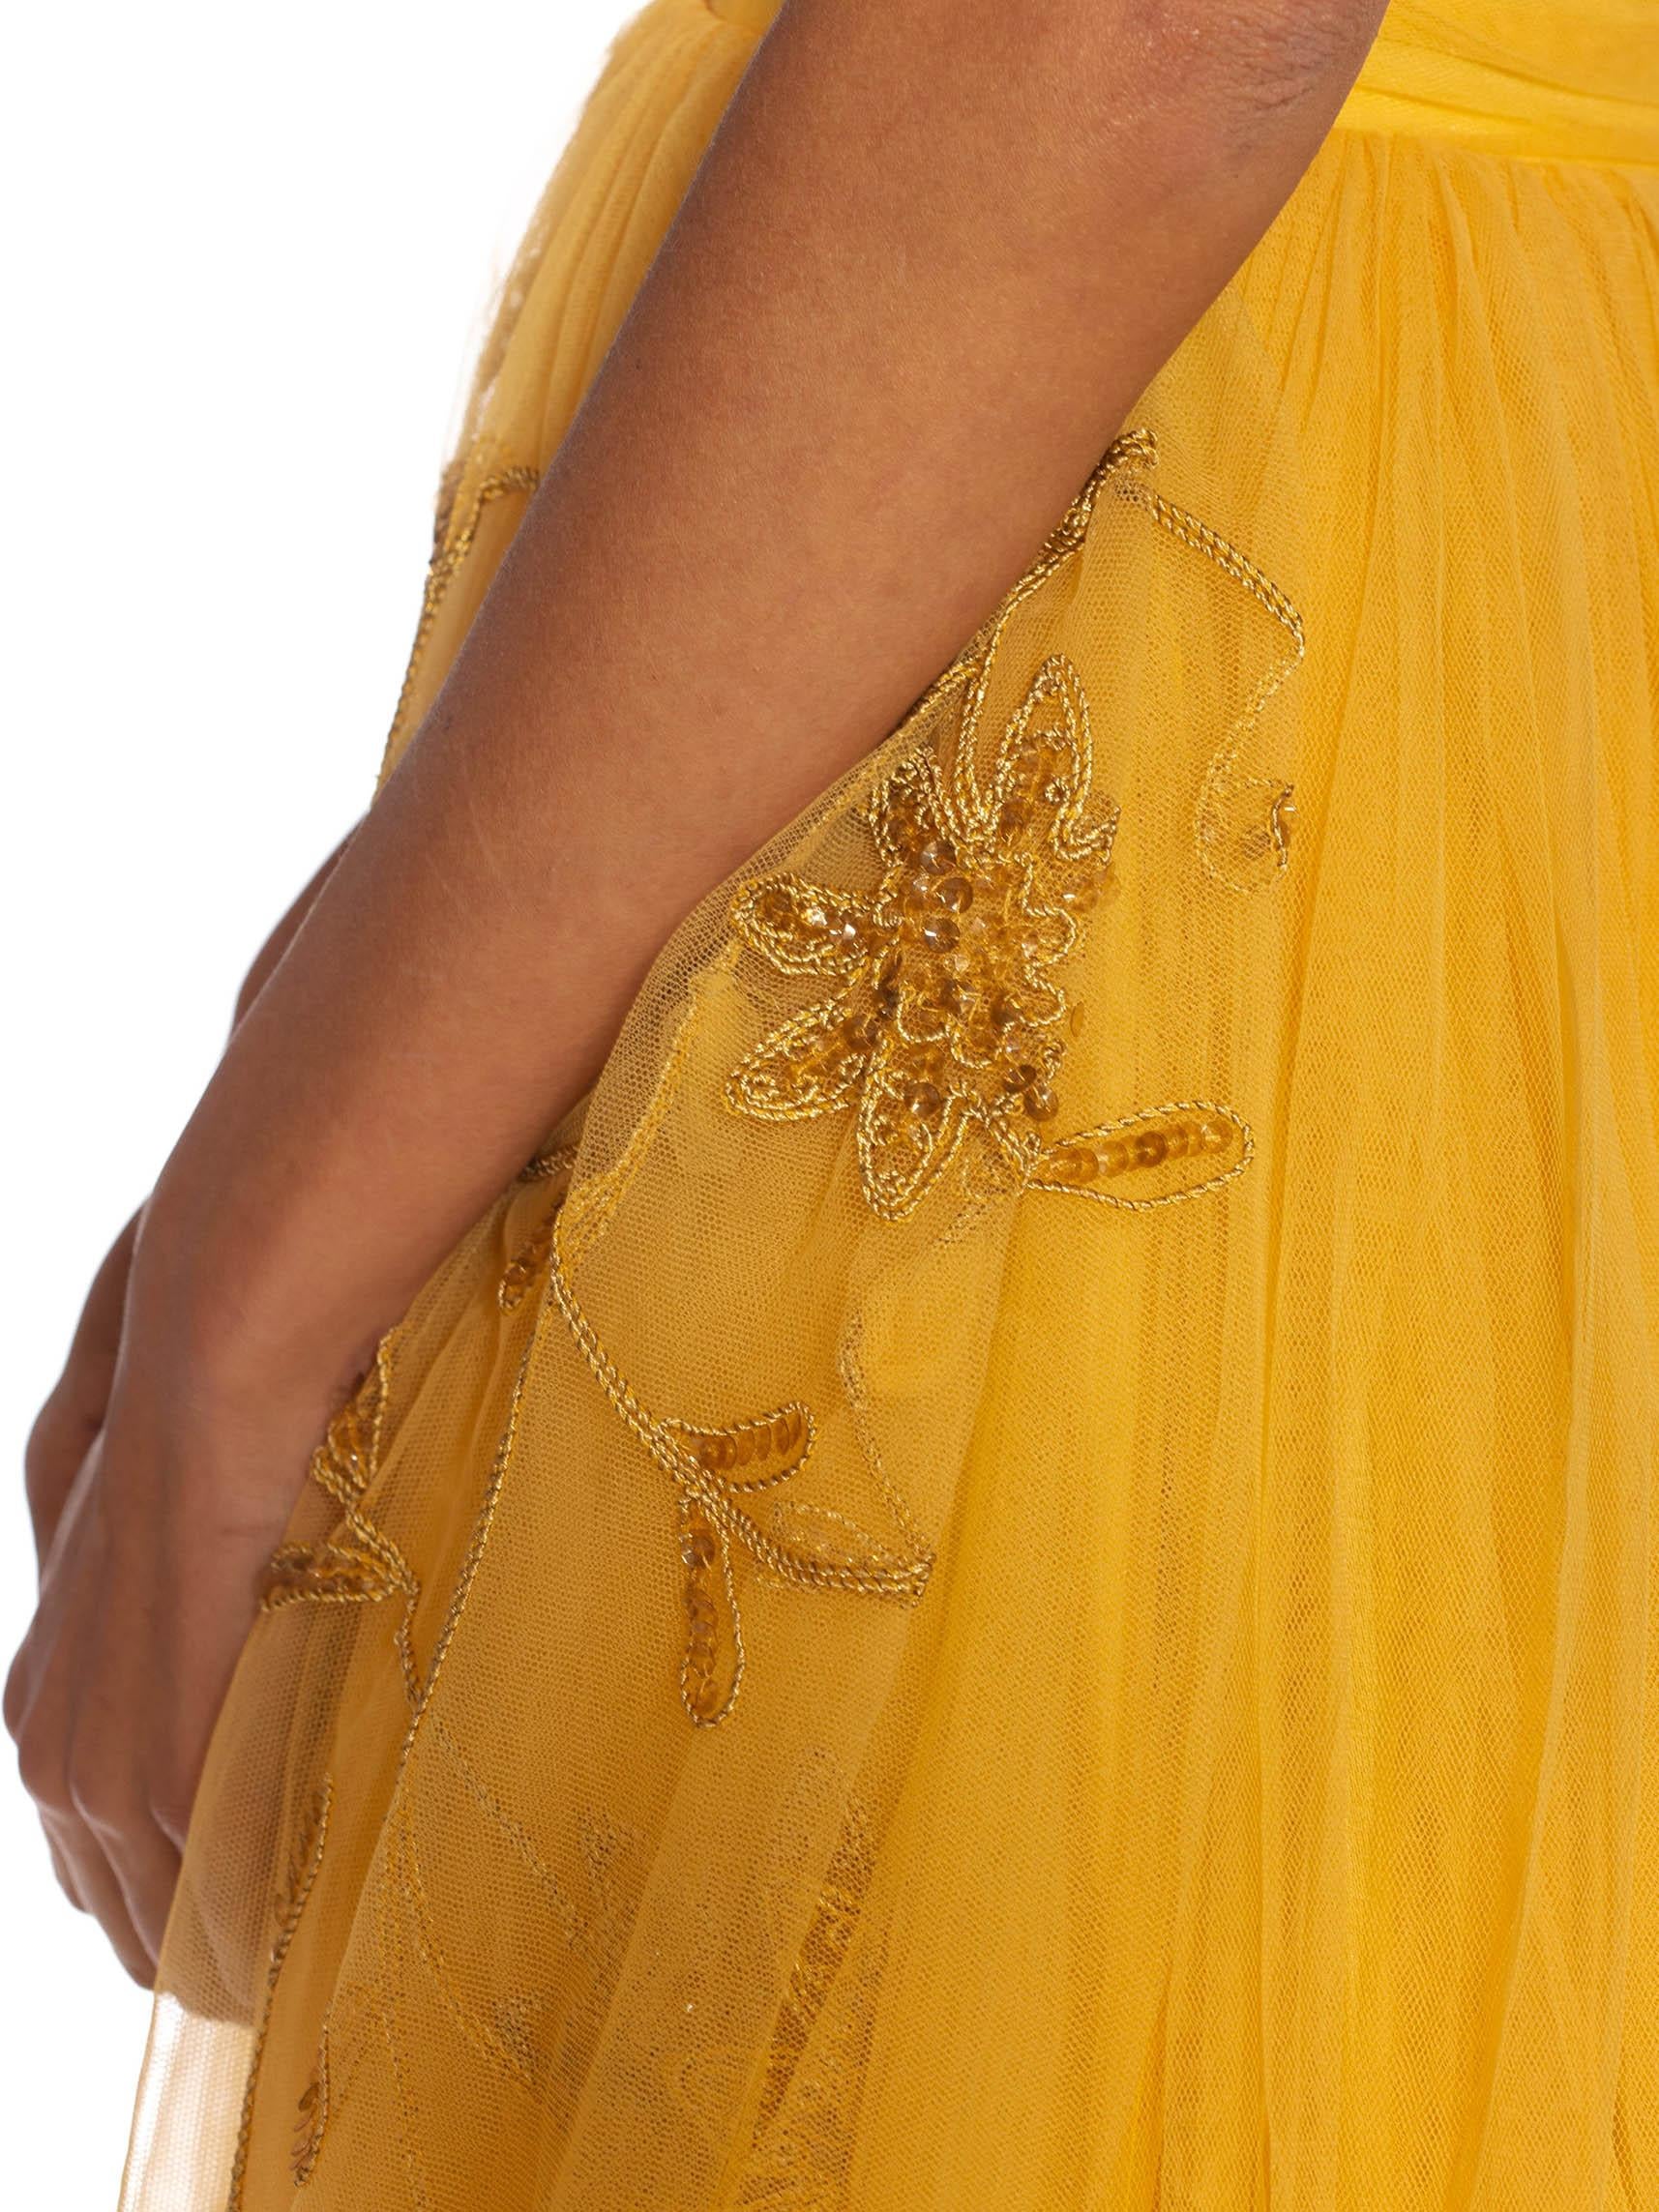 1950S Golden Yellow Rayon & Nylon Tulle Strapless Gown With Flowers For Sale 4